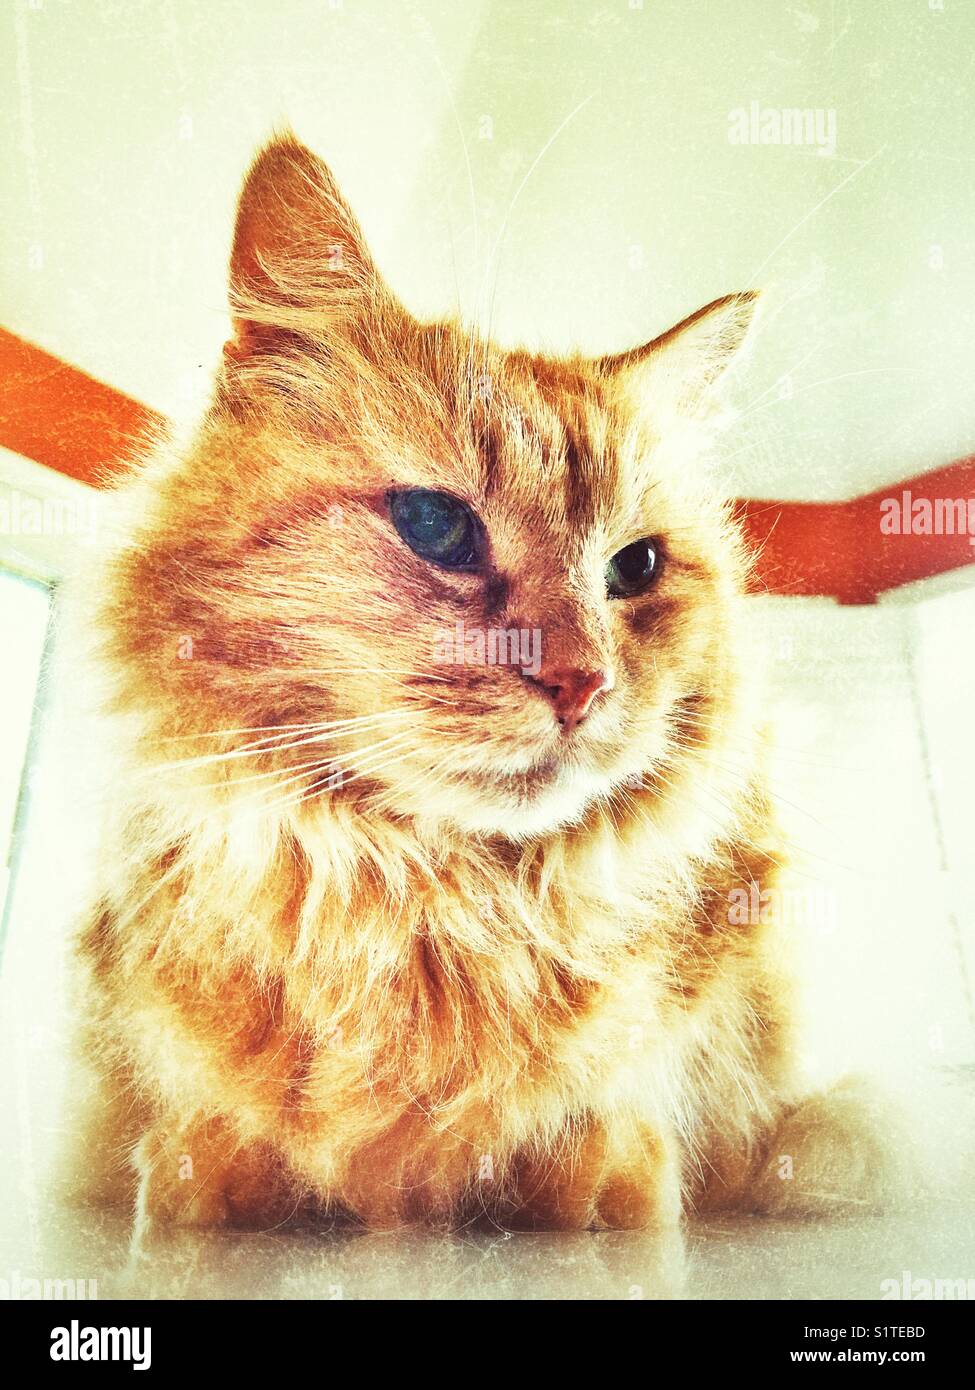 Portrait of an orange long haired tabby cat surrounded by window light Stock Photo